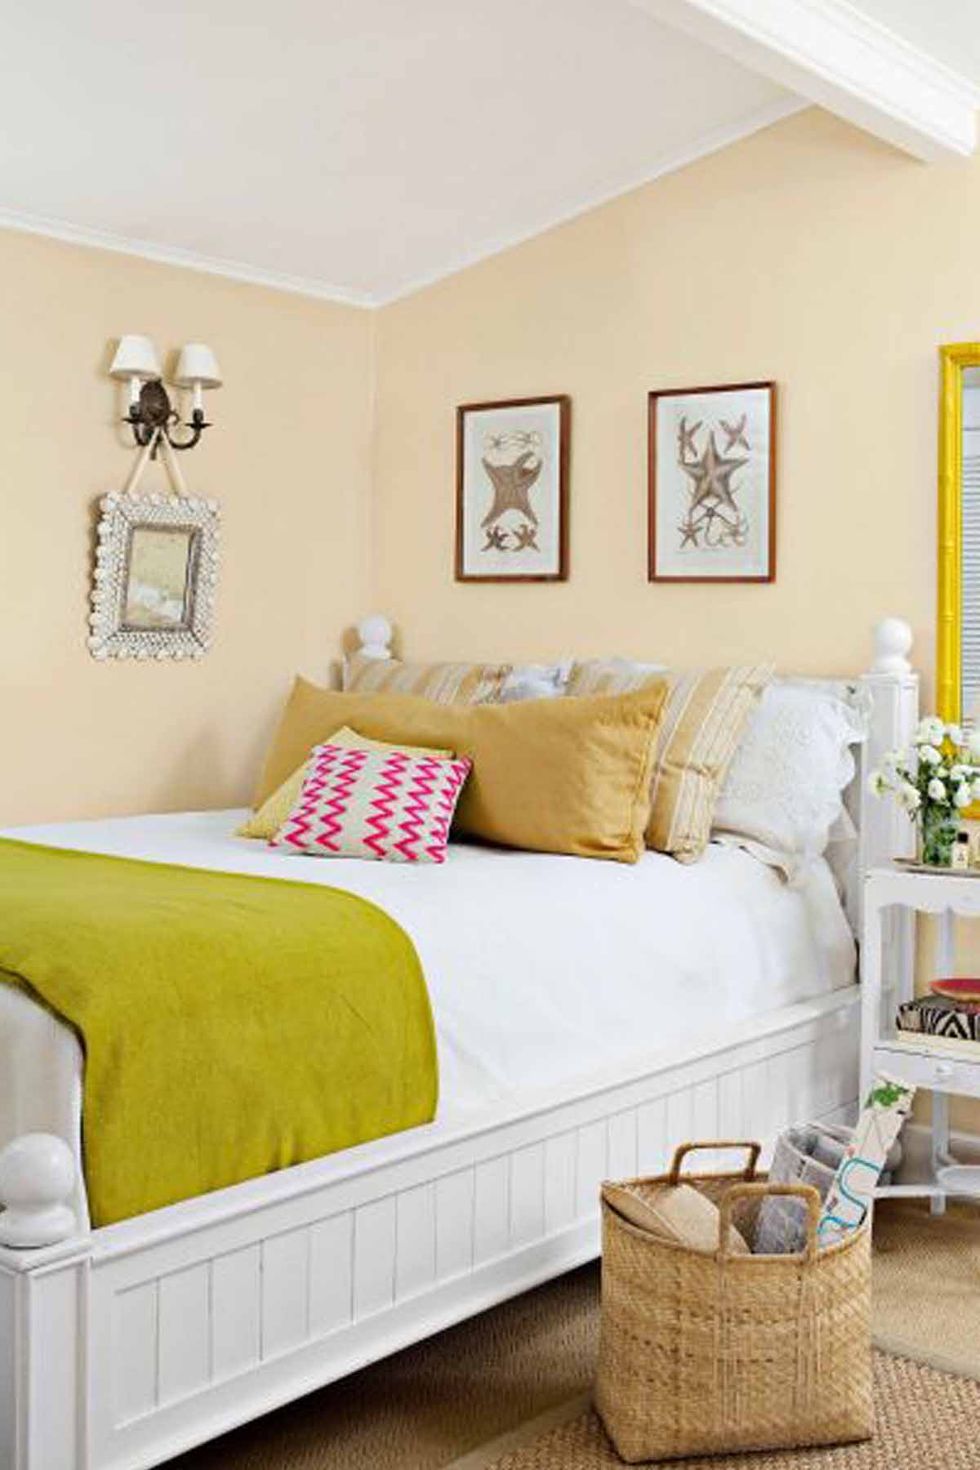 11 Cozy Paint Colors to Warm Up a Room